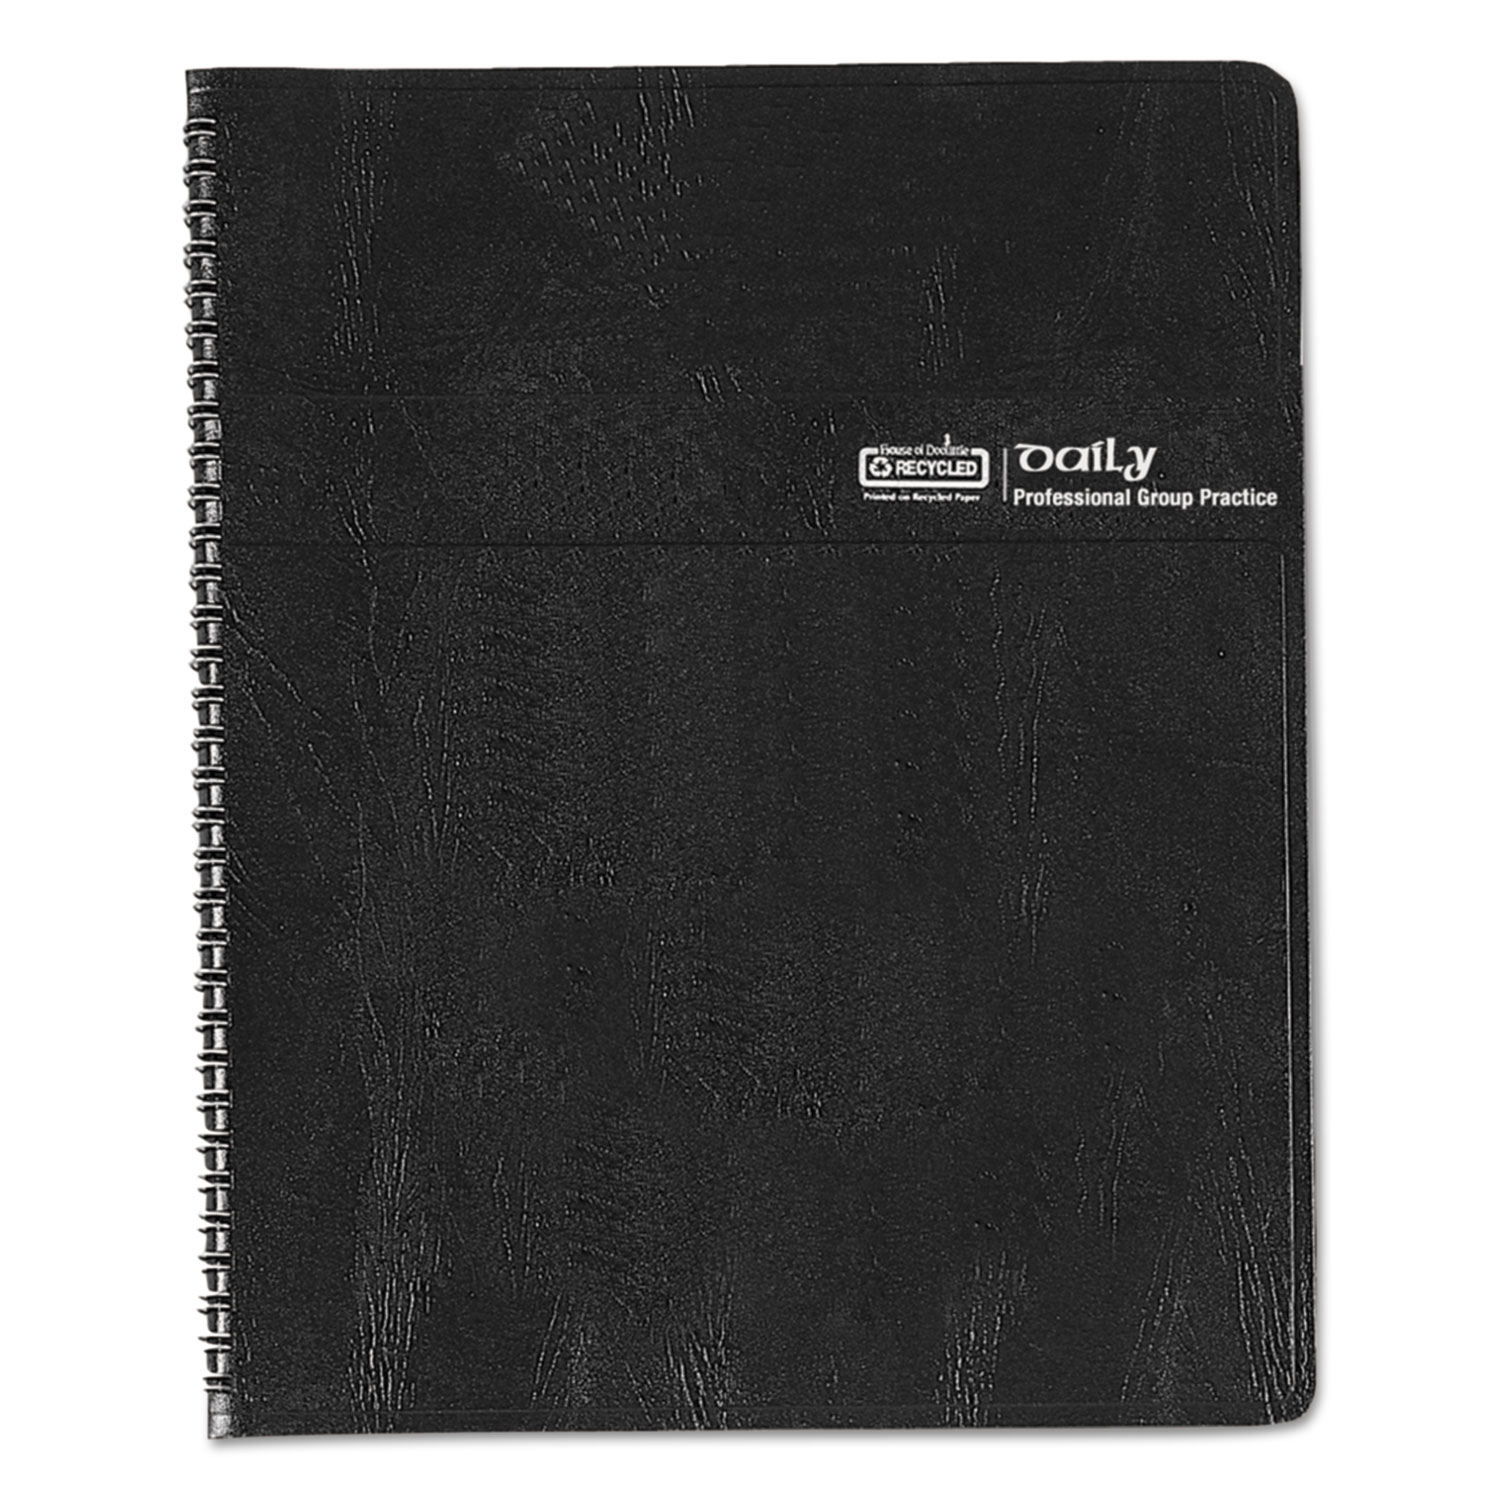 Four-Person Group Practice Daily Appointment Book, 8 x 11, Black, 2018